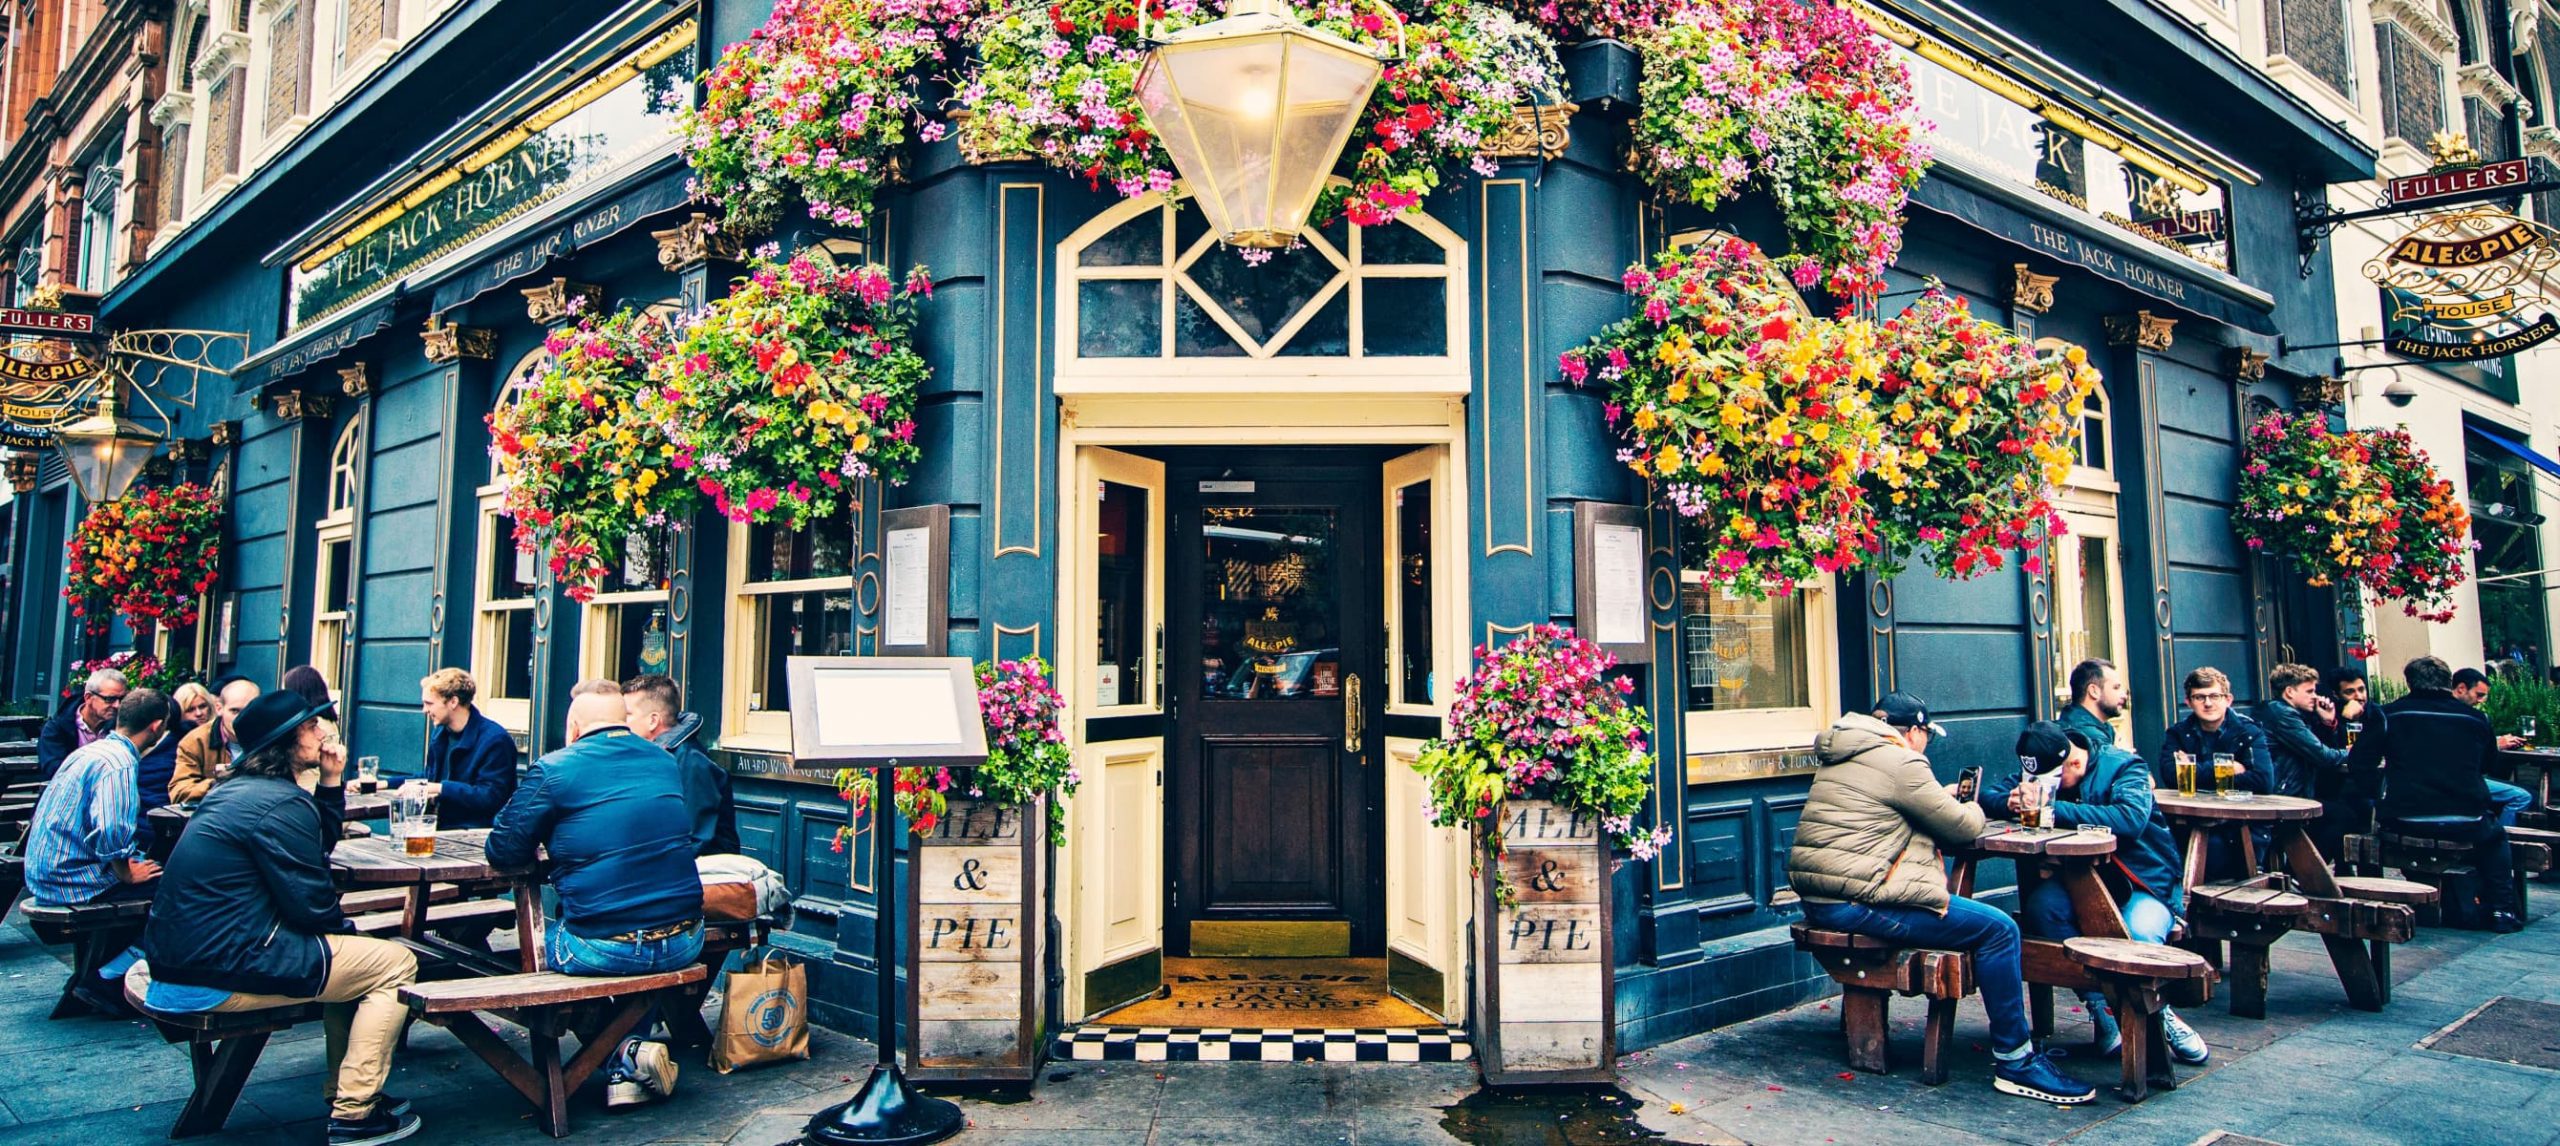 The 15 Best Pubs in London, England